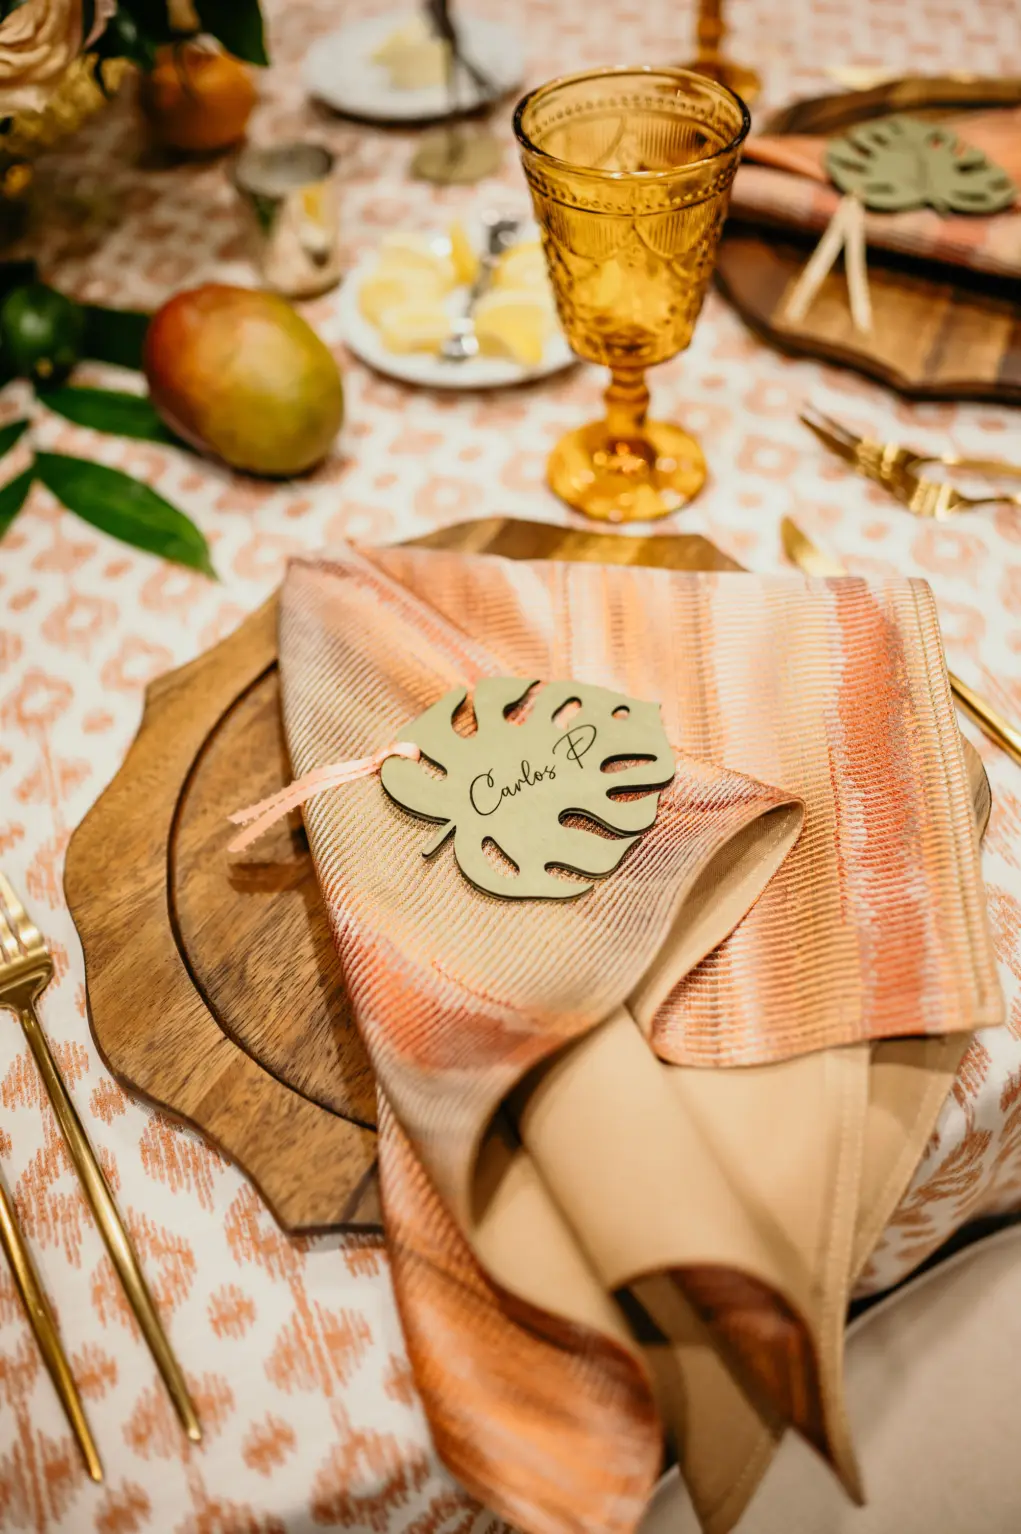 Laser-cut Monstera Leaf Place Card Inspiration | Tropical Wedding Reception Decor Ideas | Wood Charger Plate, Gold Flatware and Amber Vintage Glassware from Kate Ryan Event Rentals